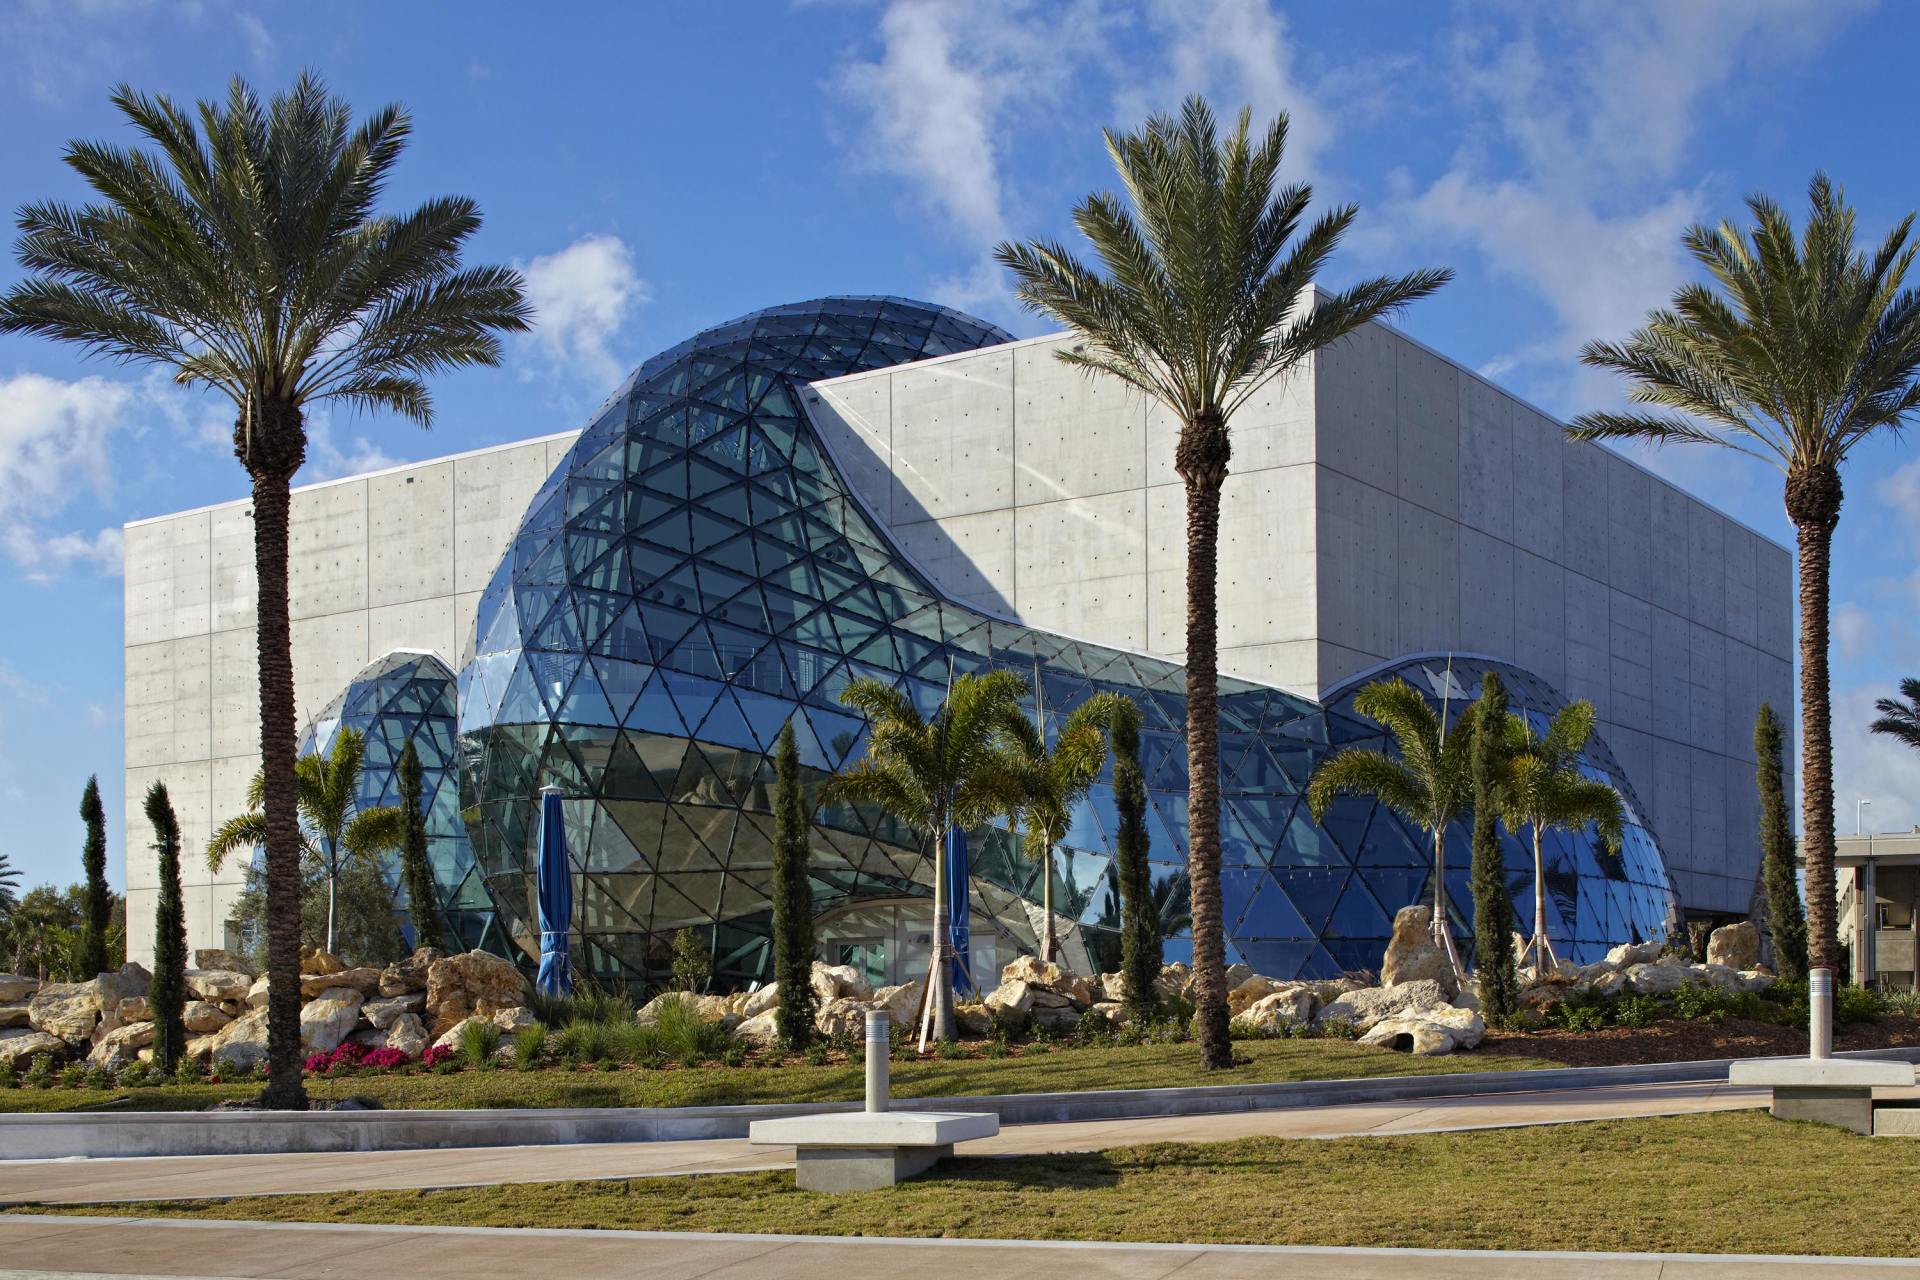 Four hundred thousand international visitors flock annually to the Salvador Dalí Museum in St. Petersburg. (Credit: VisitStPeteClearwater.com)